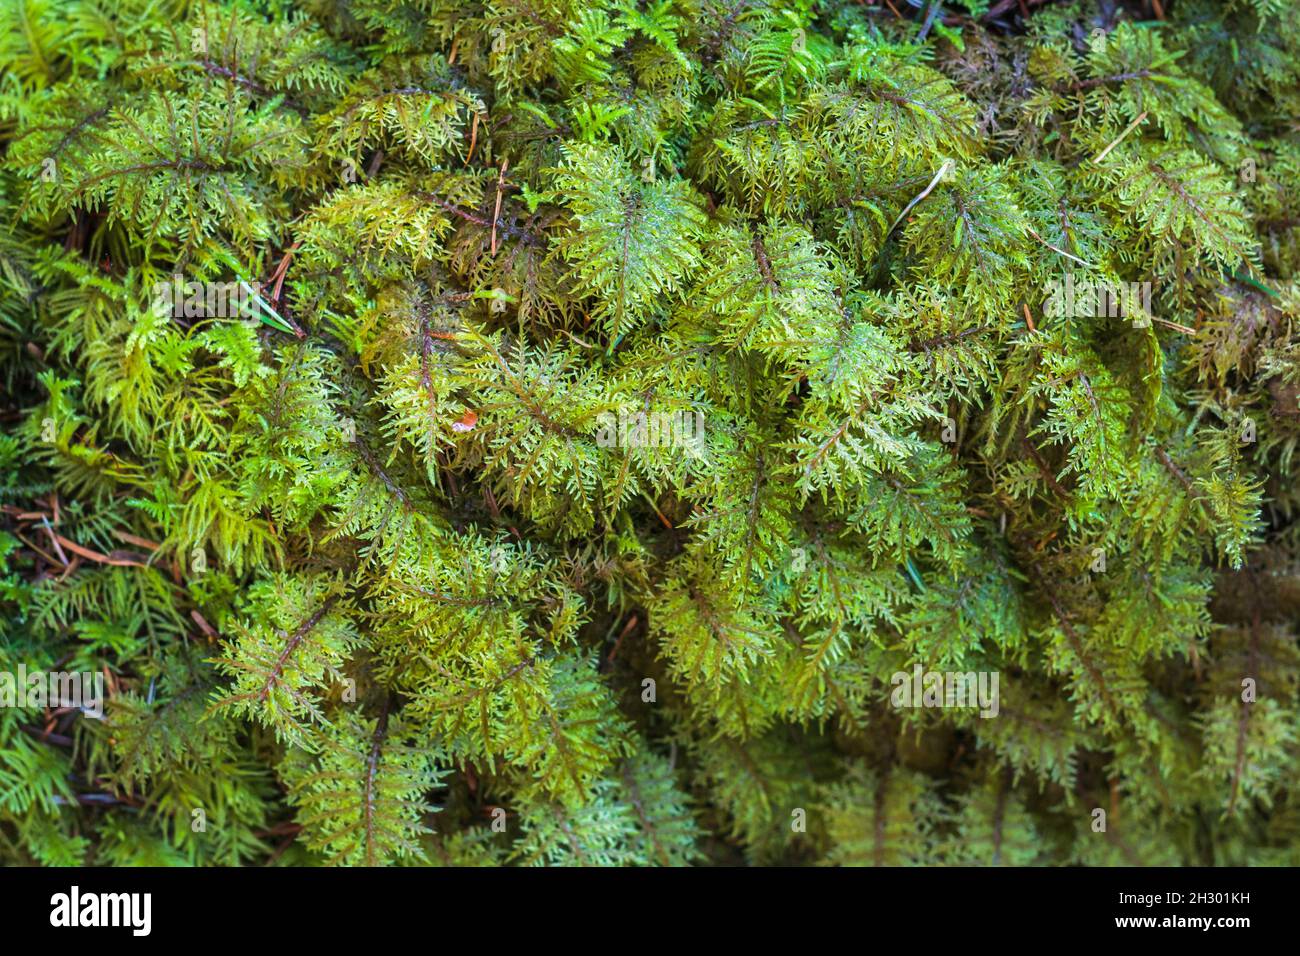 Closeup detail of a deep, dense green carpet of feathery moss (Kindbergia oregana) growing on the damp forest floor in coastal British Columbia. Stock Photo